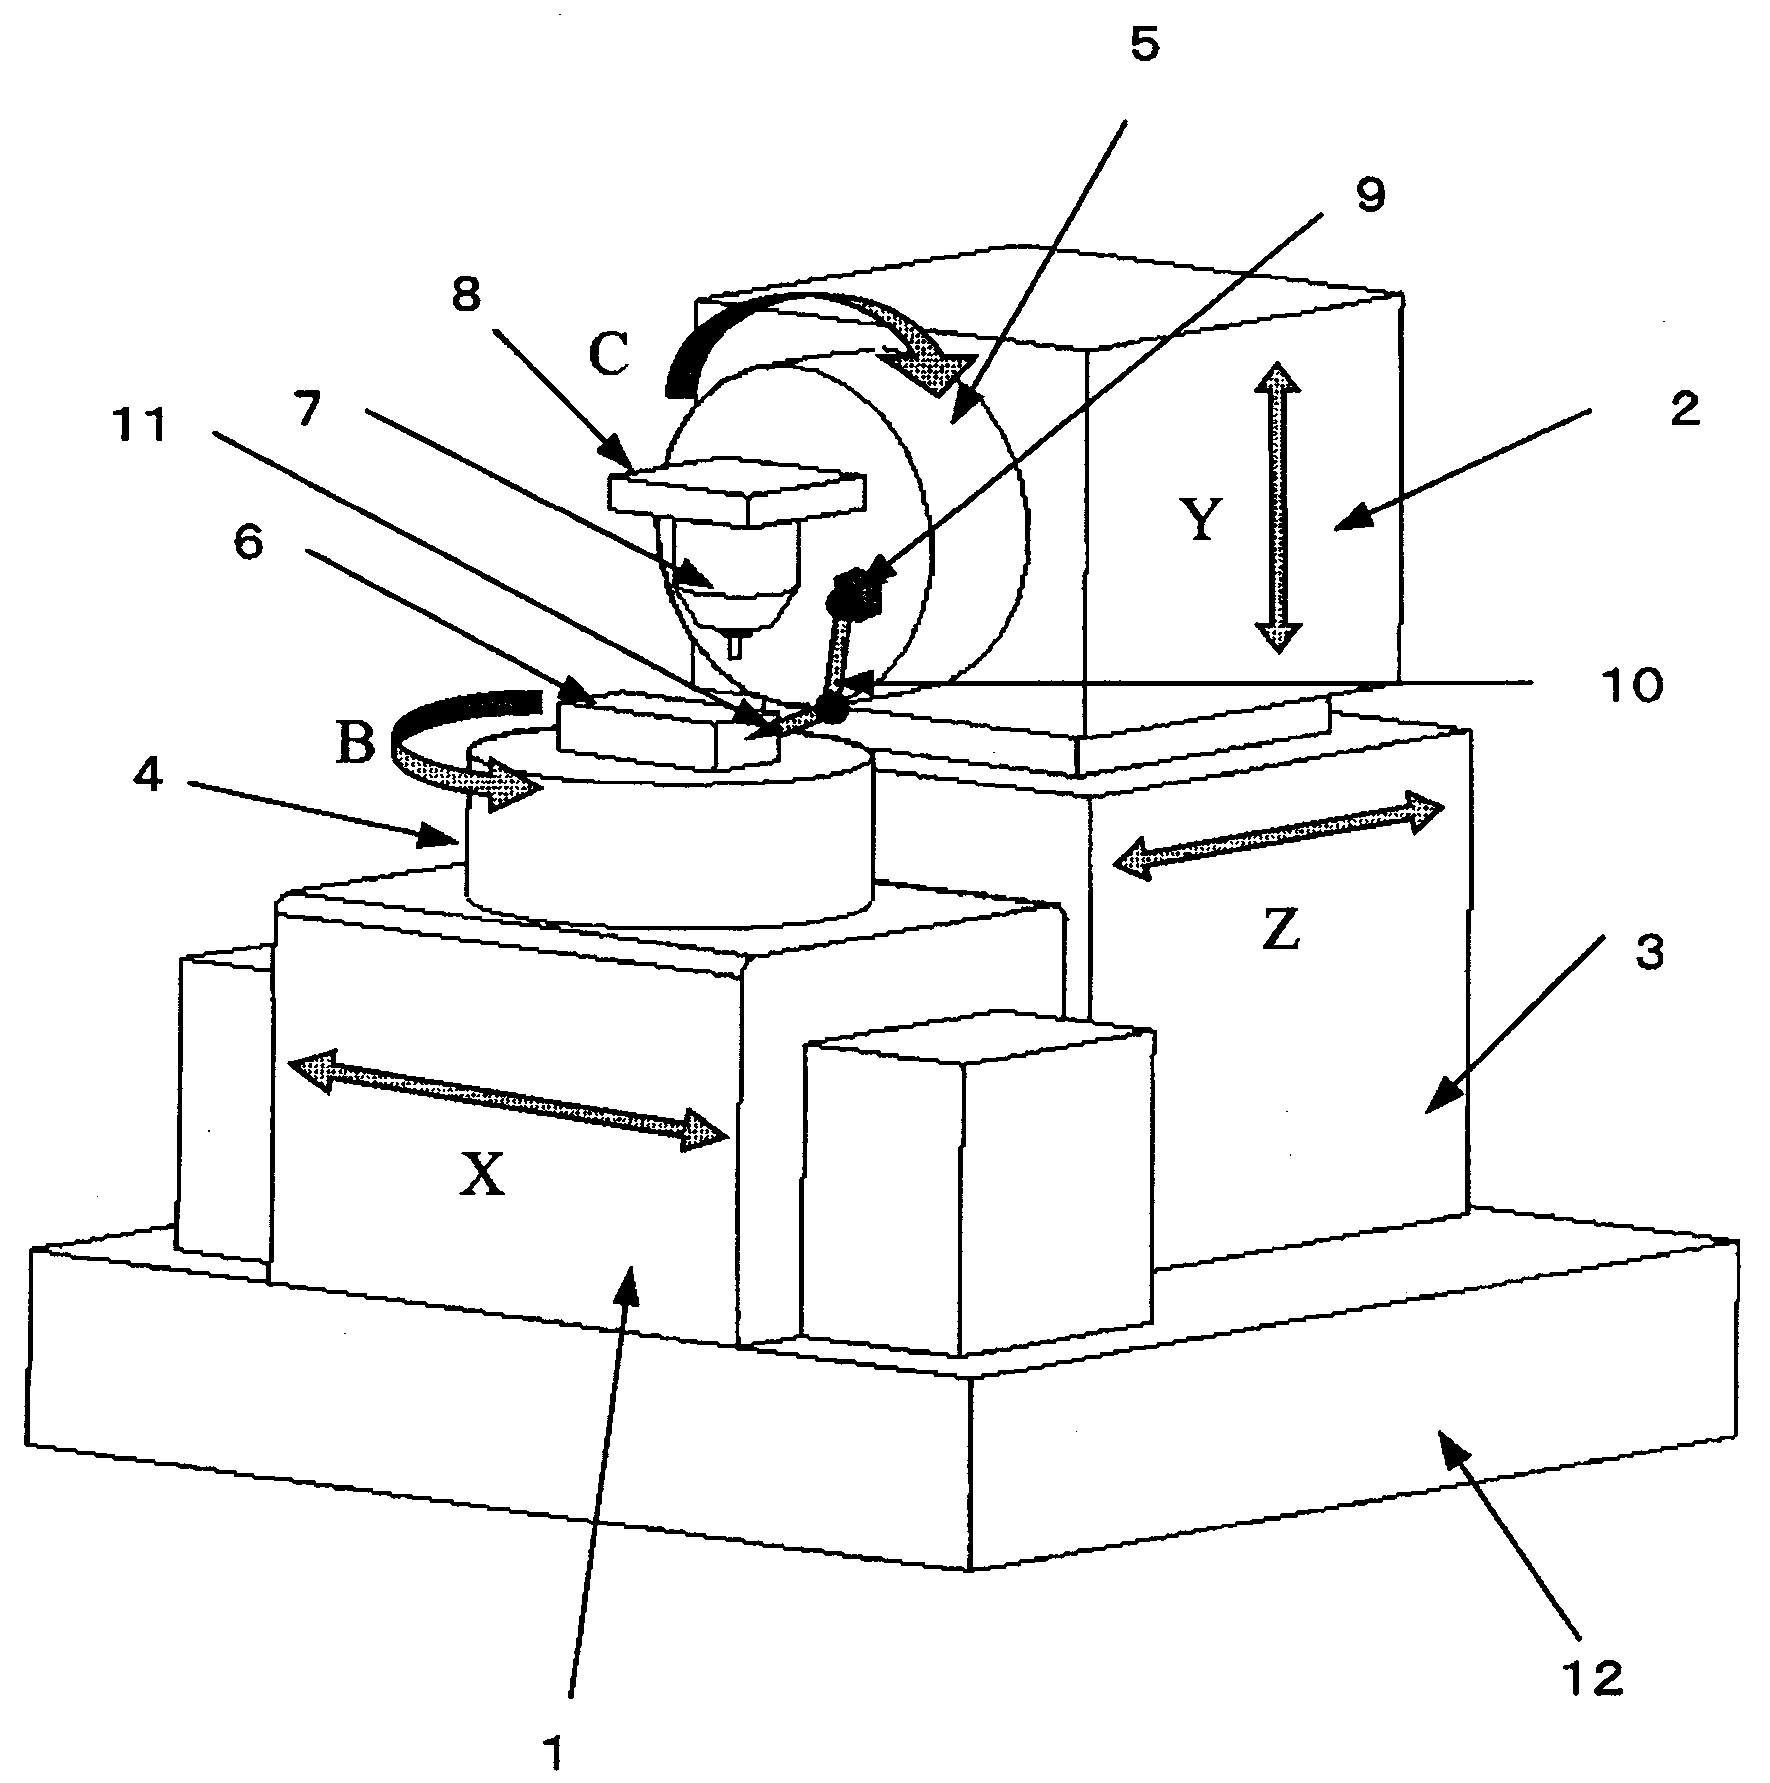 Machine tool having function of correcting mounting error through contact detection